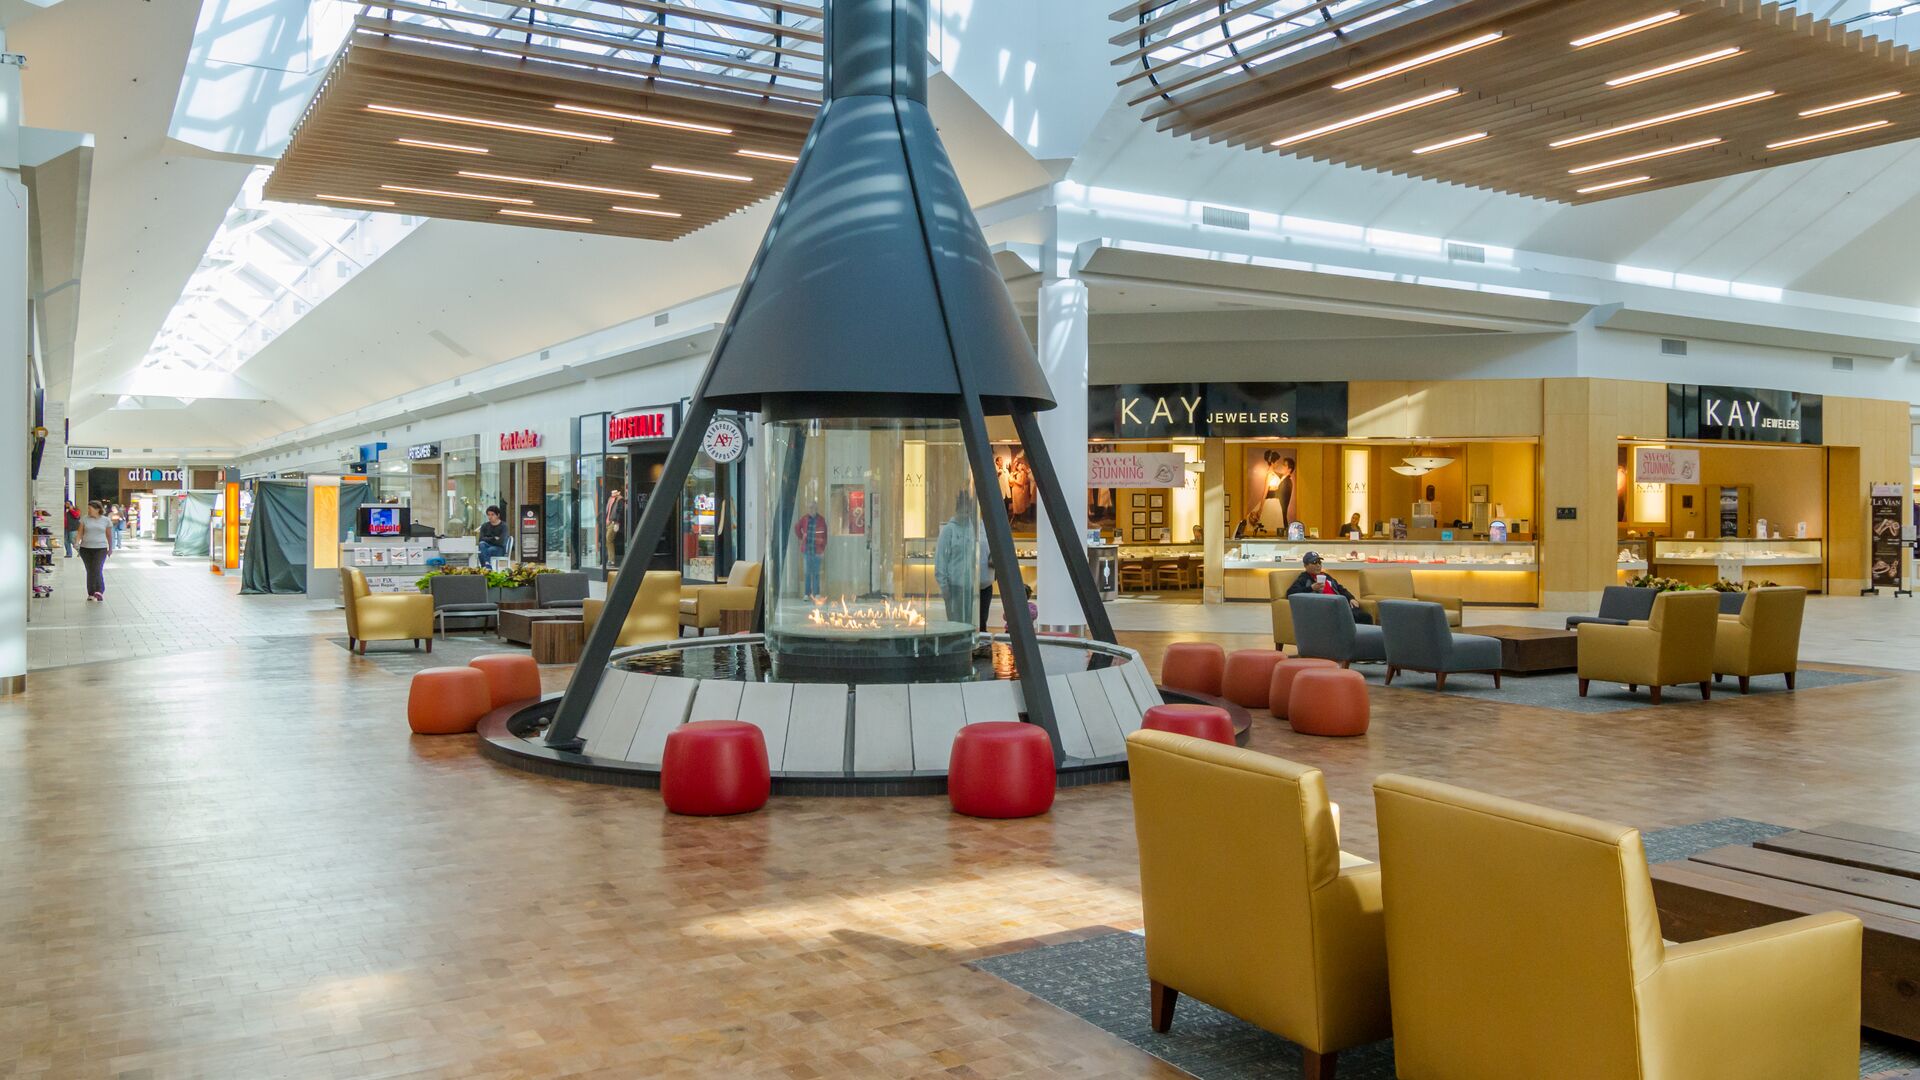 Indoors at Chesterfield Towne Center